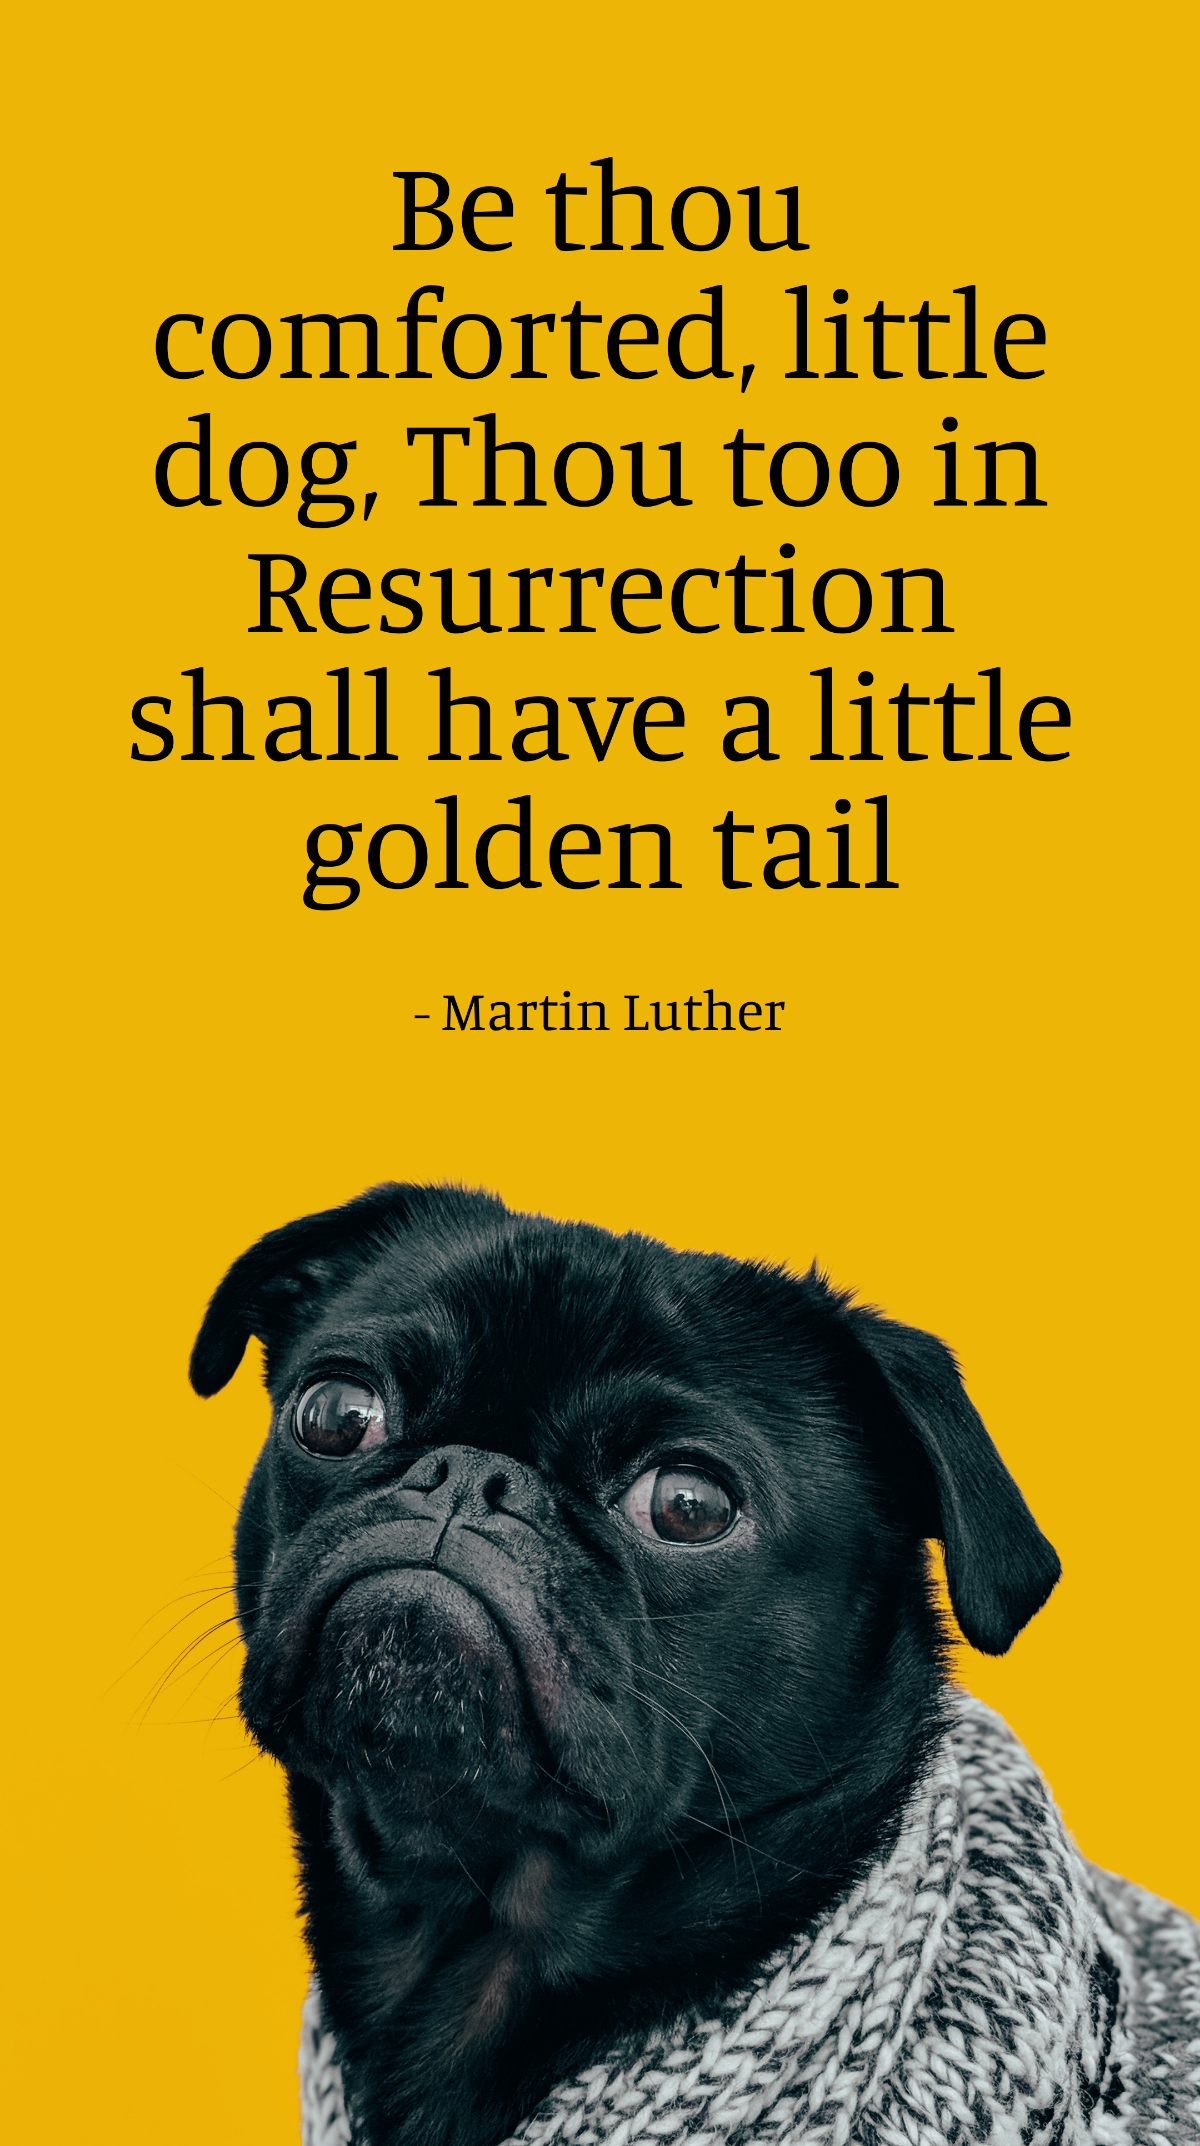 Free Martin Luther - Be thou comforted, little dog, Thou too in Resurrection shall have a little golden tail Template